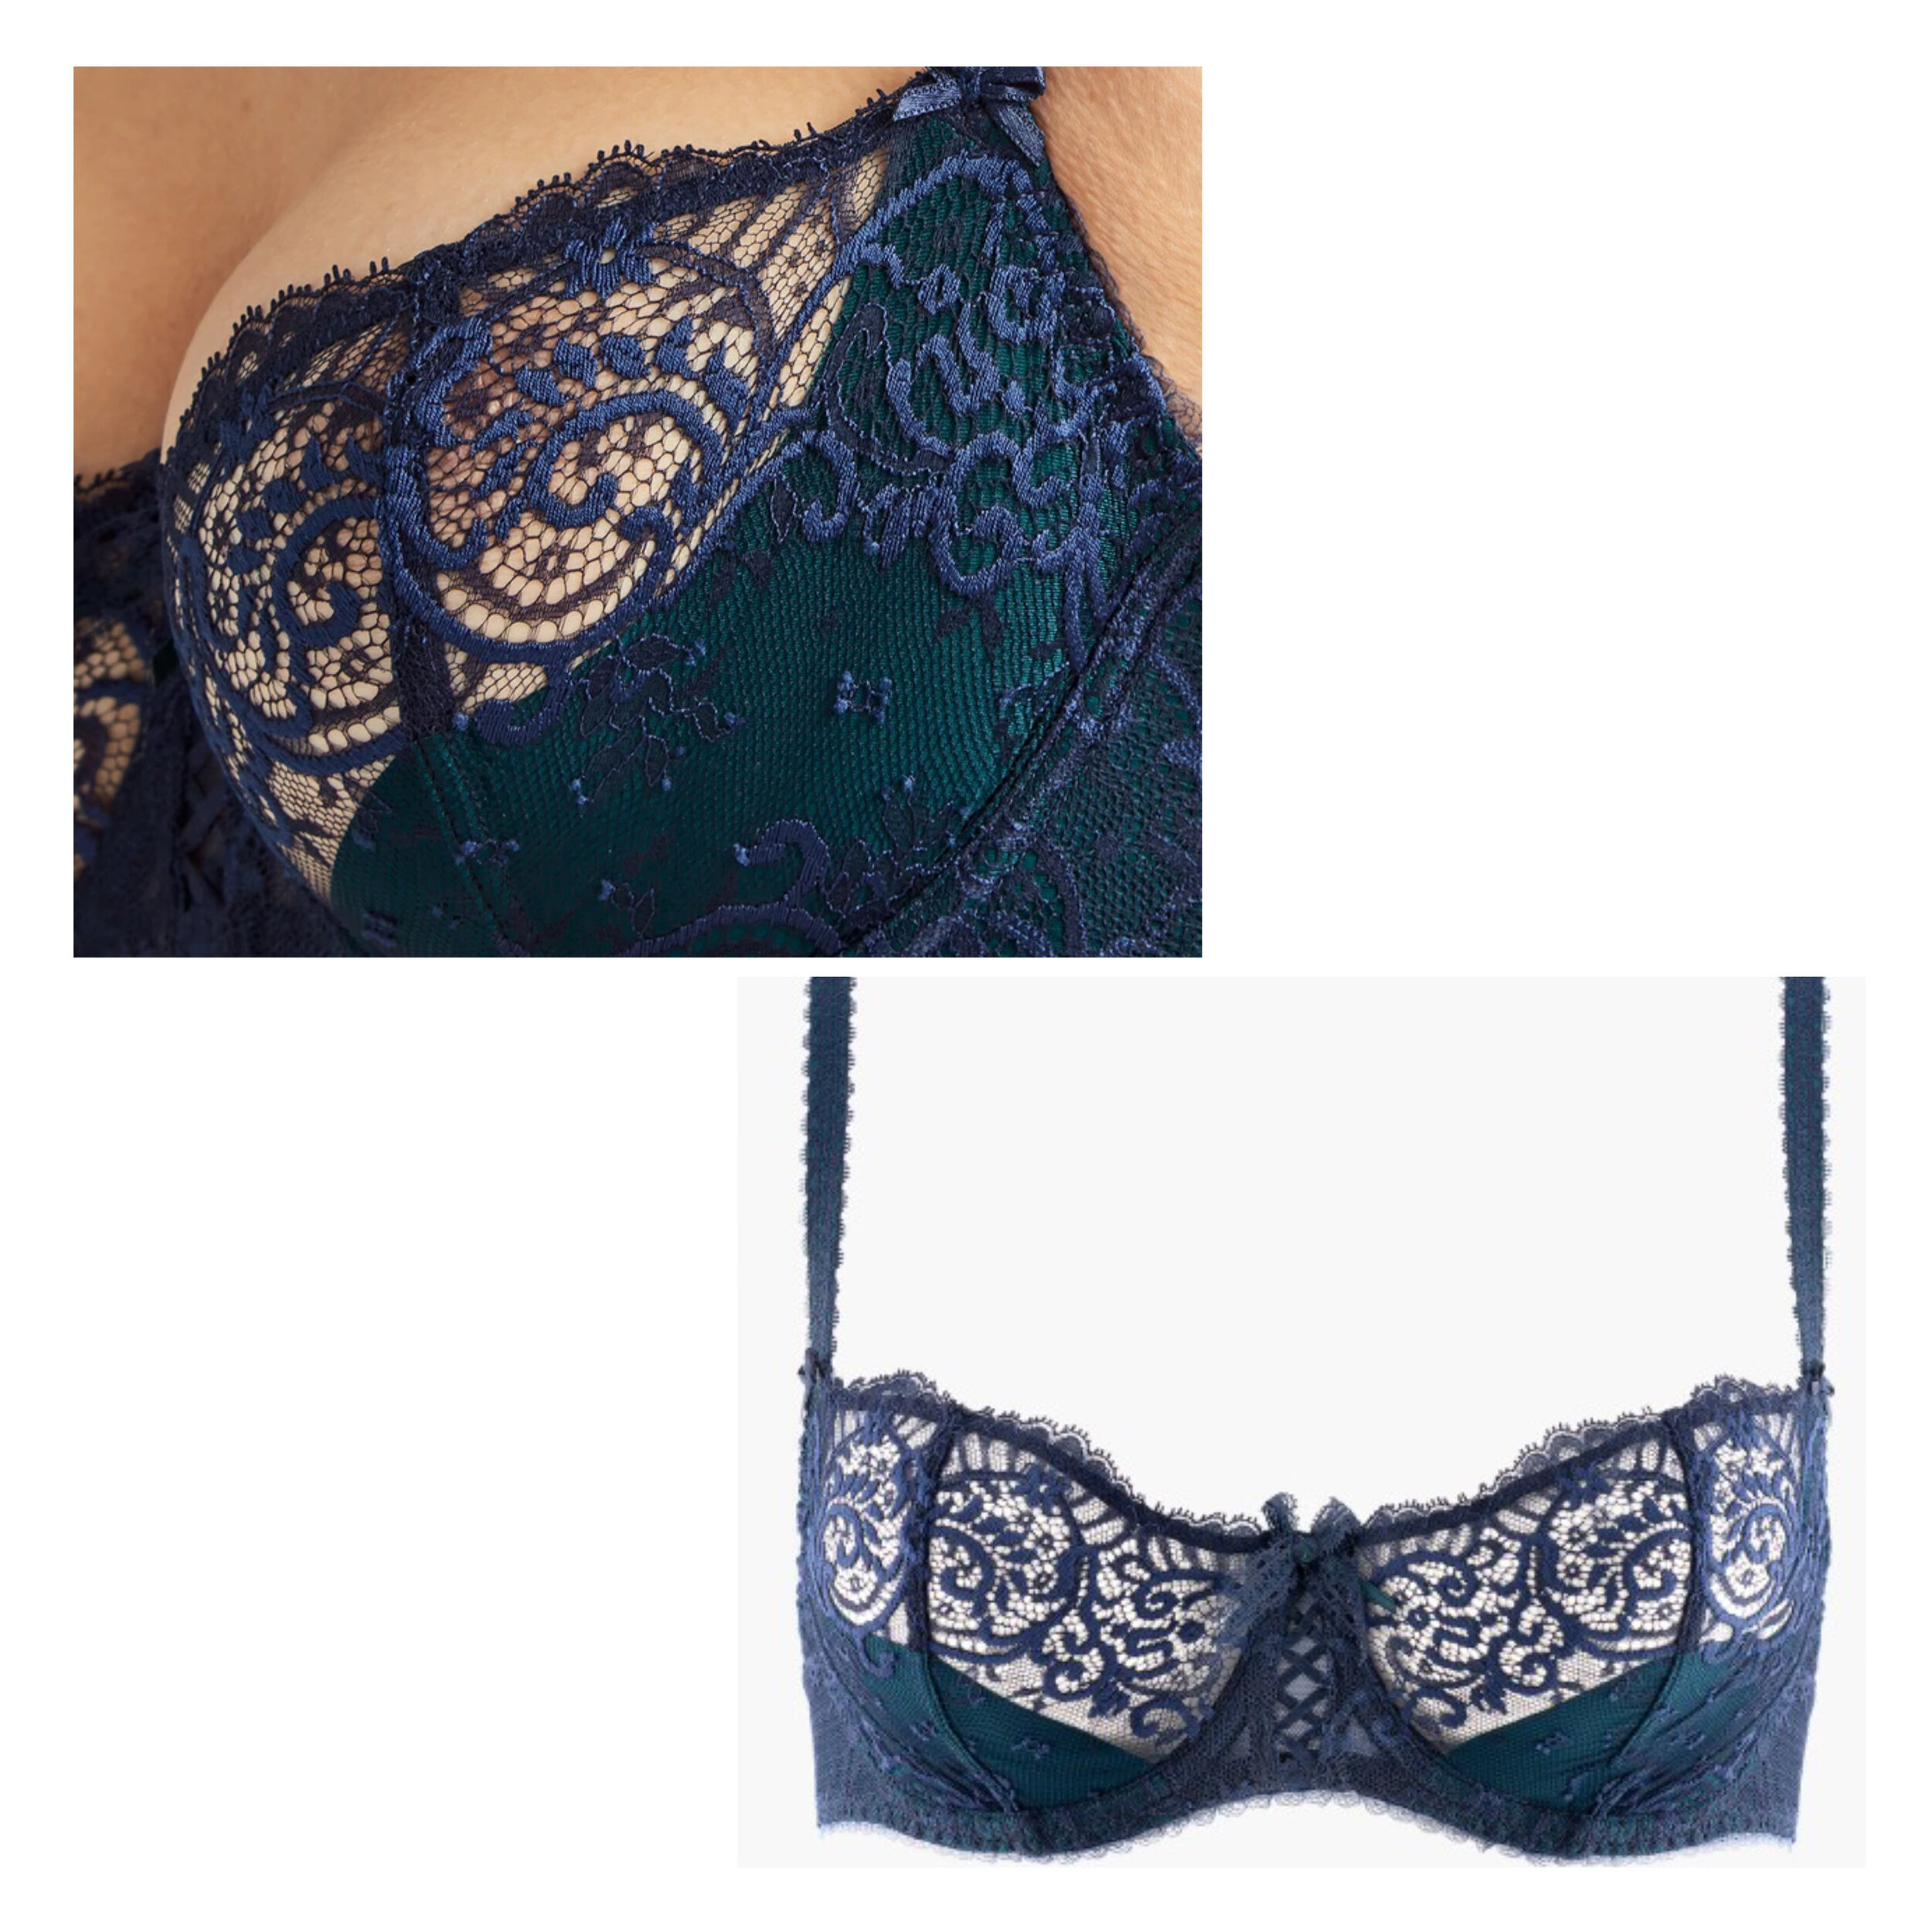 Ariel Bra Cup Pattern by Porcelynne - Part 2 - Sewing the Bra Cups and Seam  Coverings 